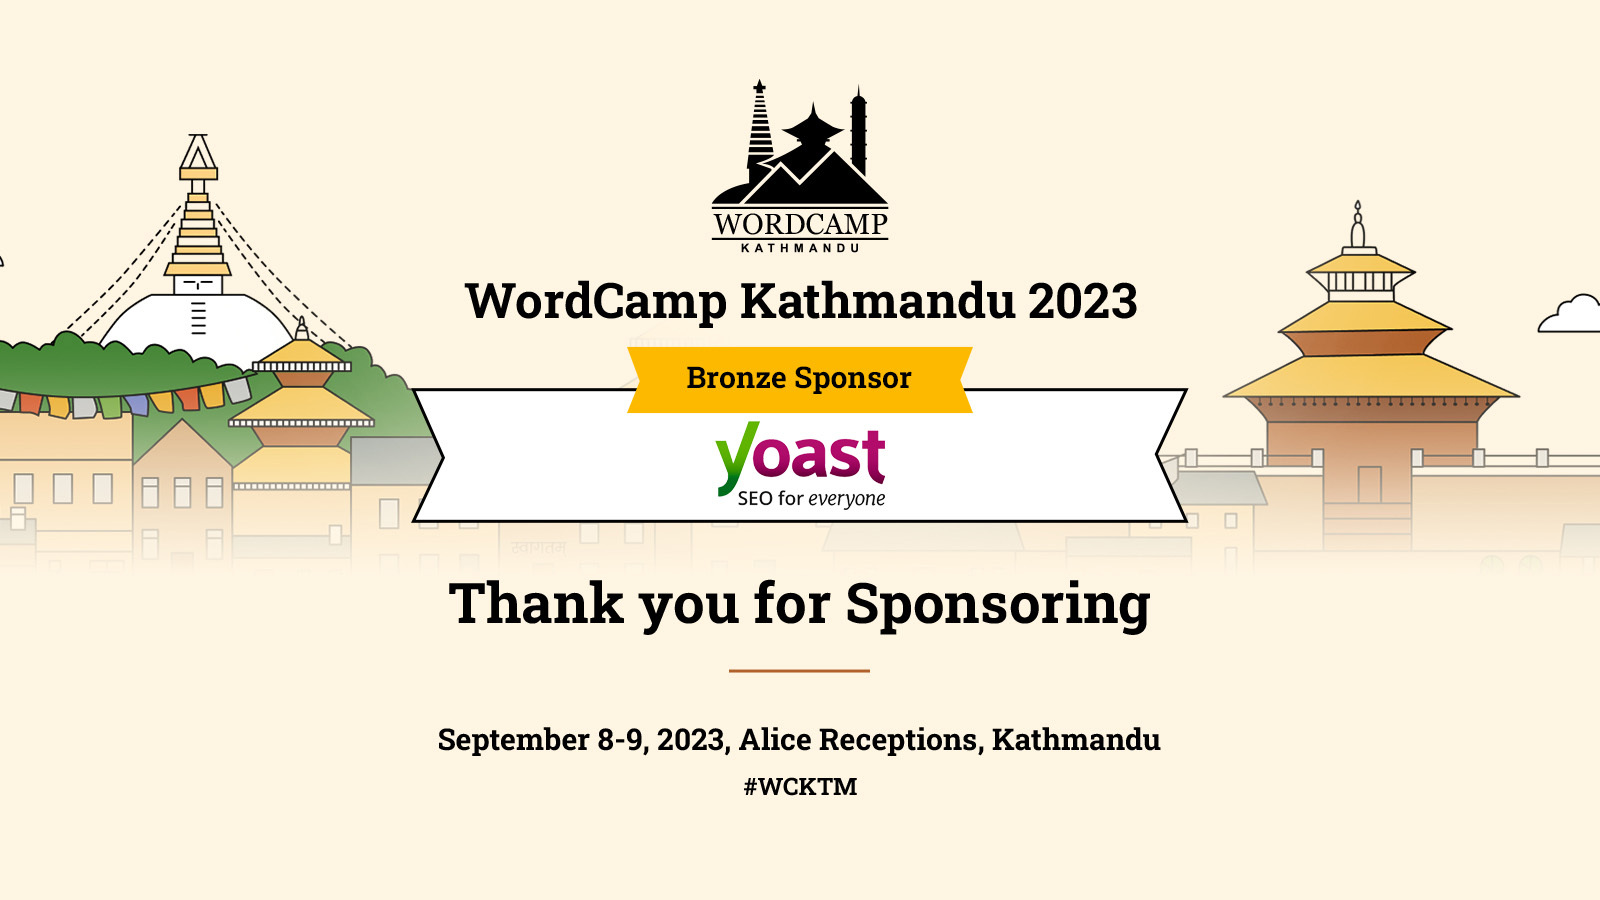 Thank you Yoast BV for sponsoring